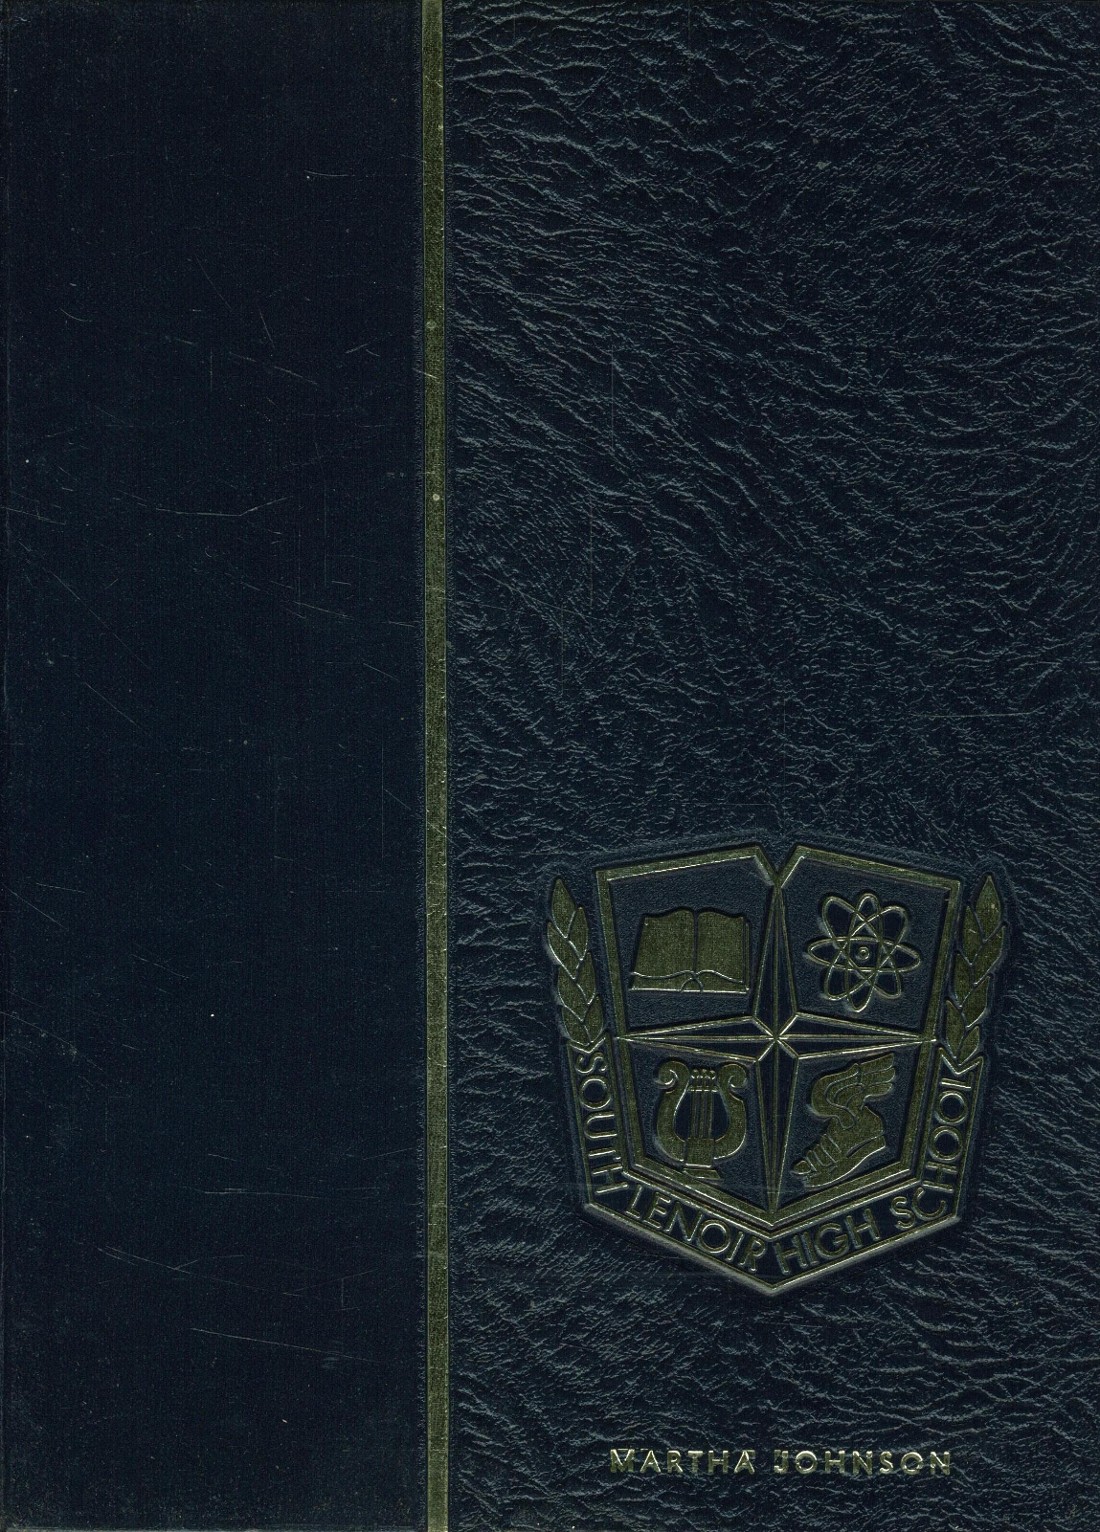 1967 Yearbook From South Lenoir High School From Deep Run North